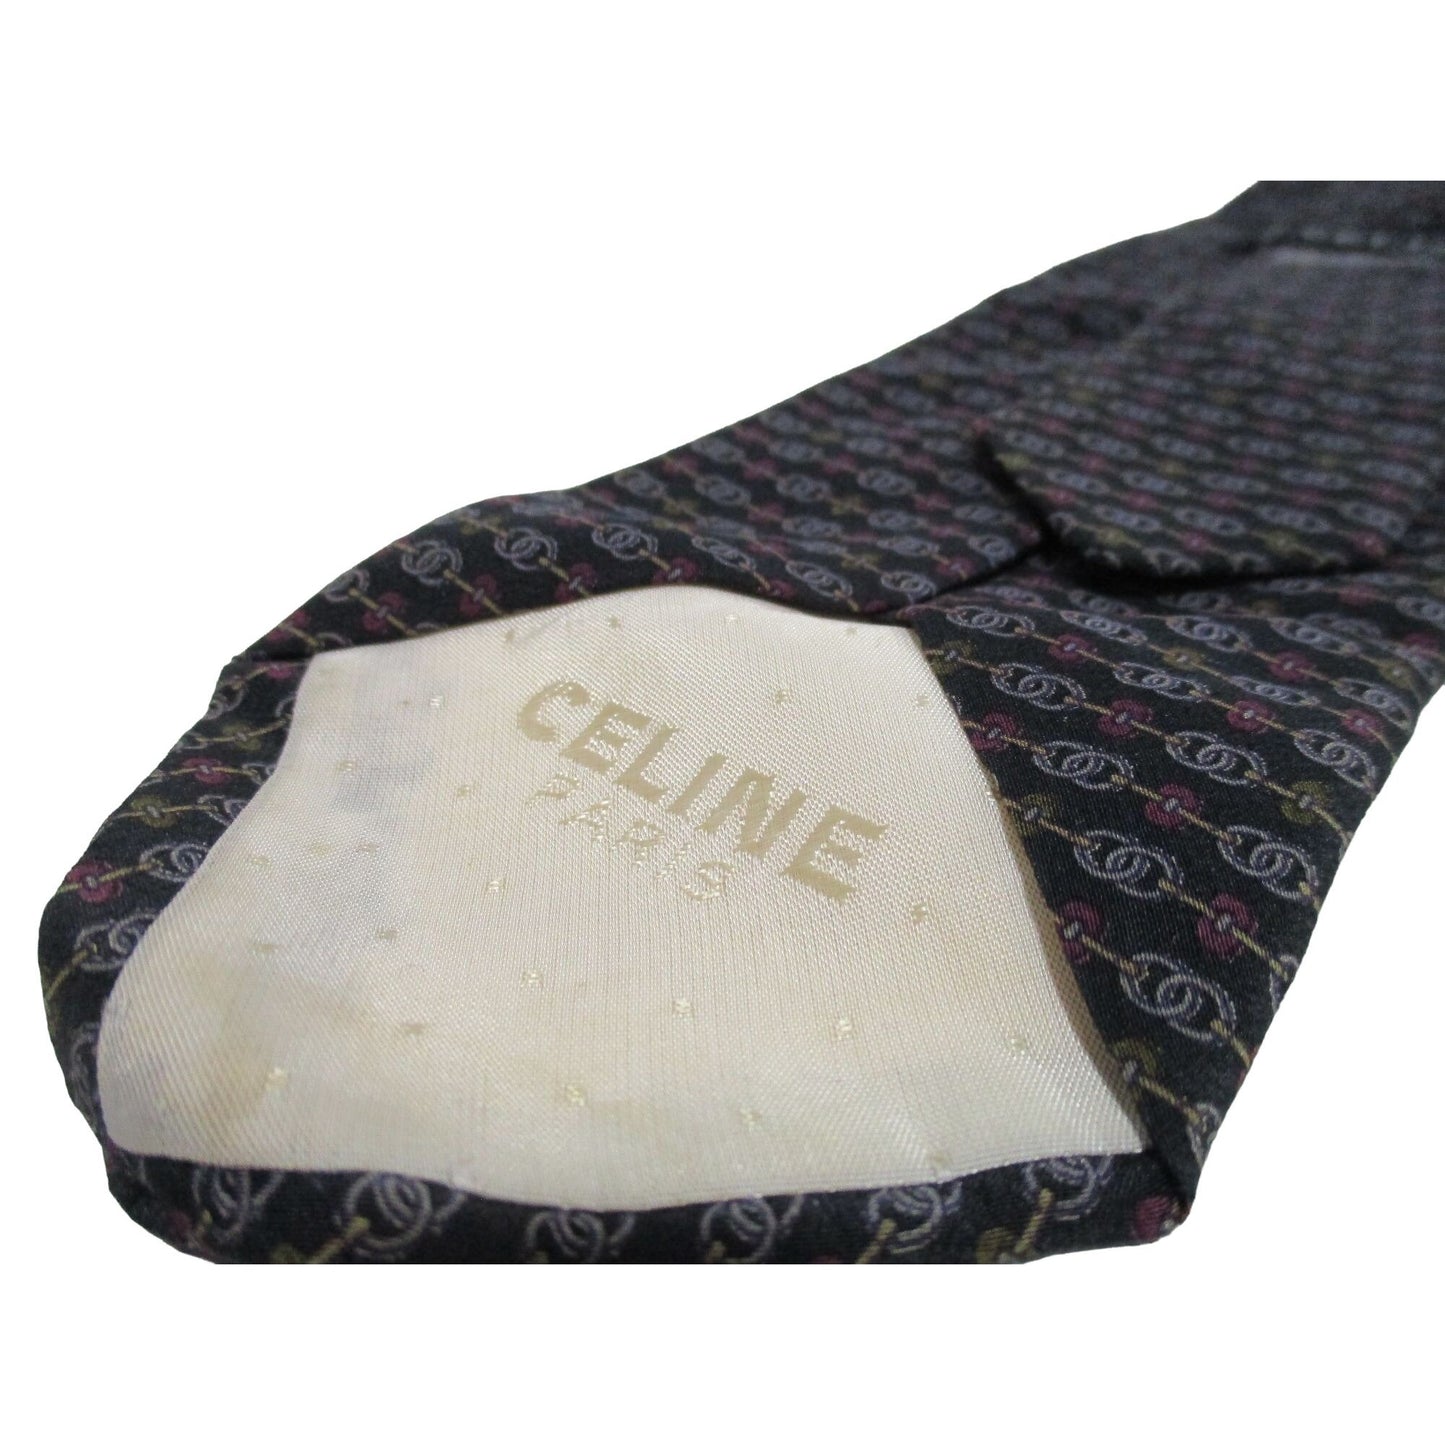 vintage Celine tie made of 100% silk with a logo print in shades of blue with green and red/pink.